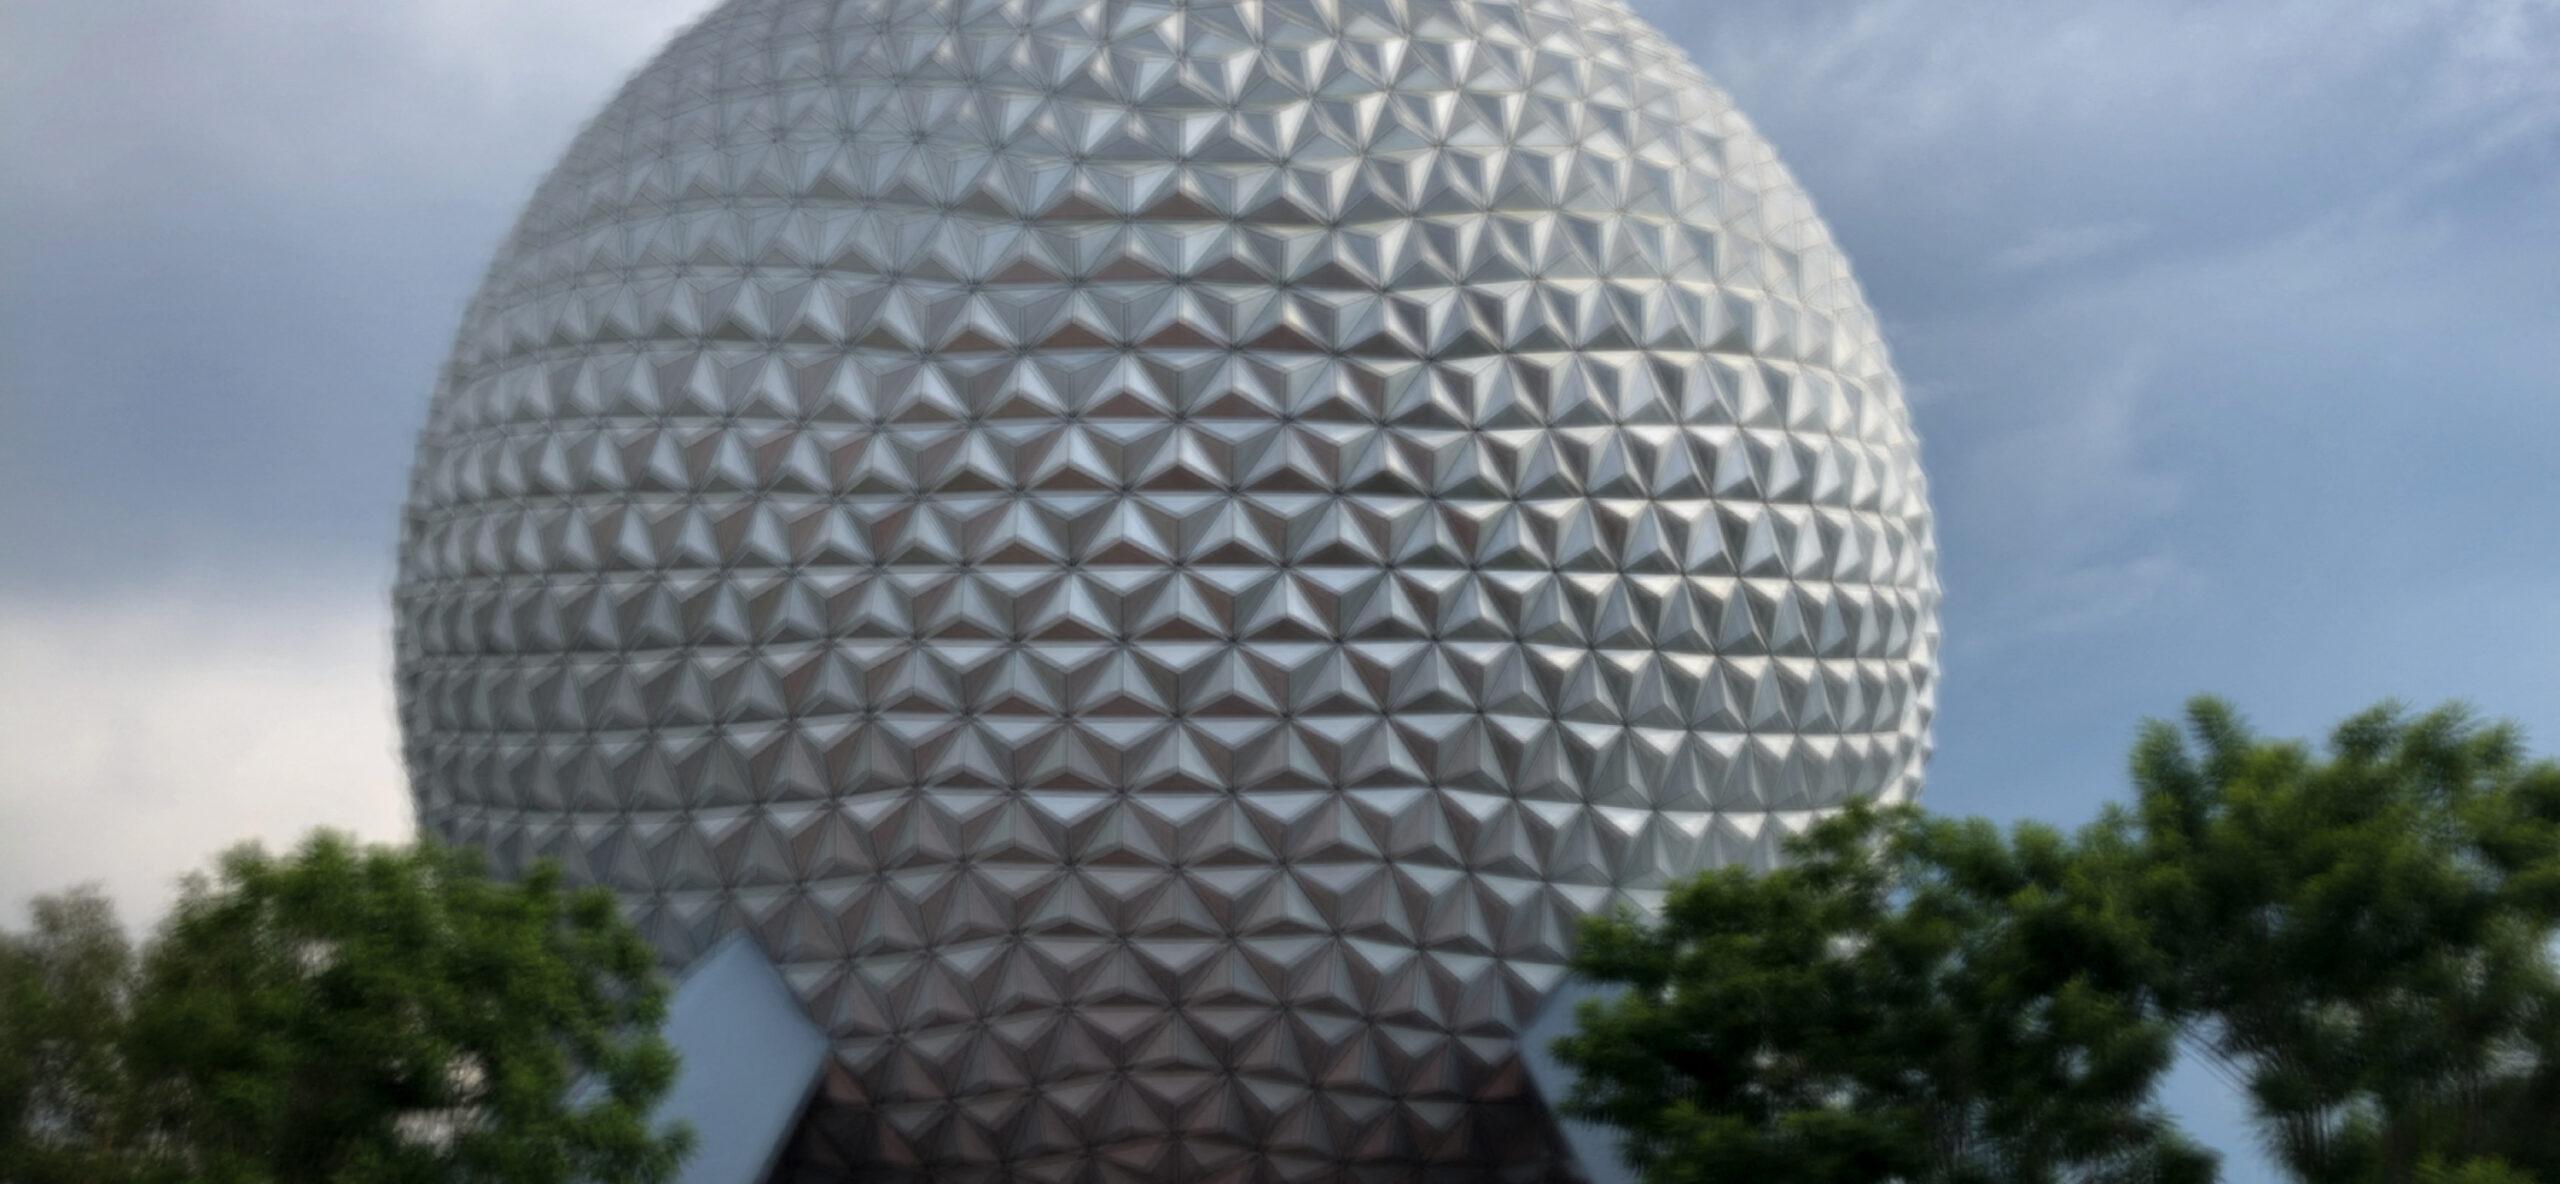 Man Attempts To Kidnap Disney Employee, Remains At Large